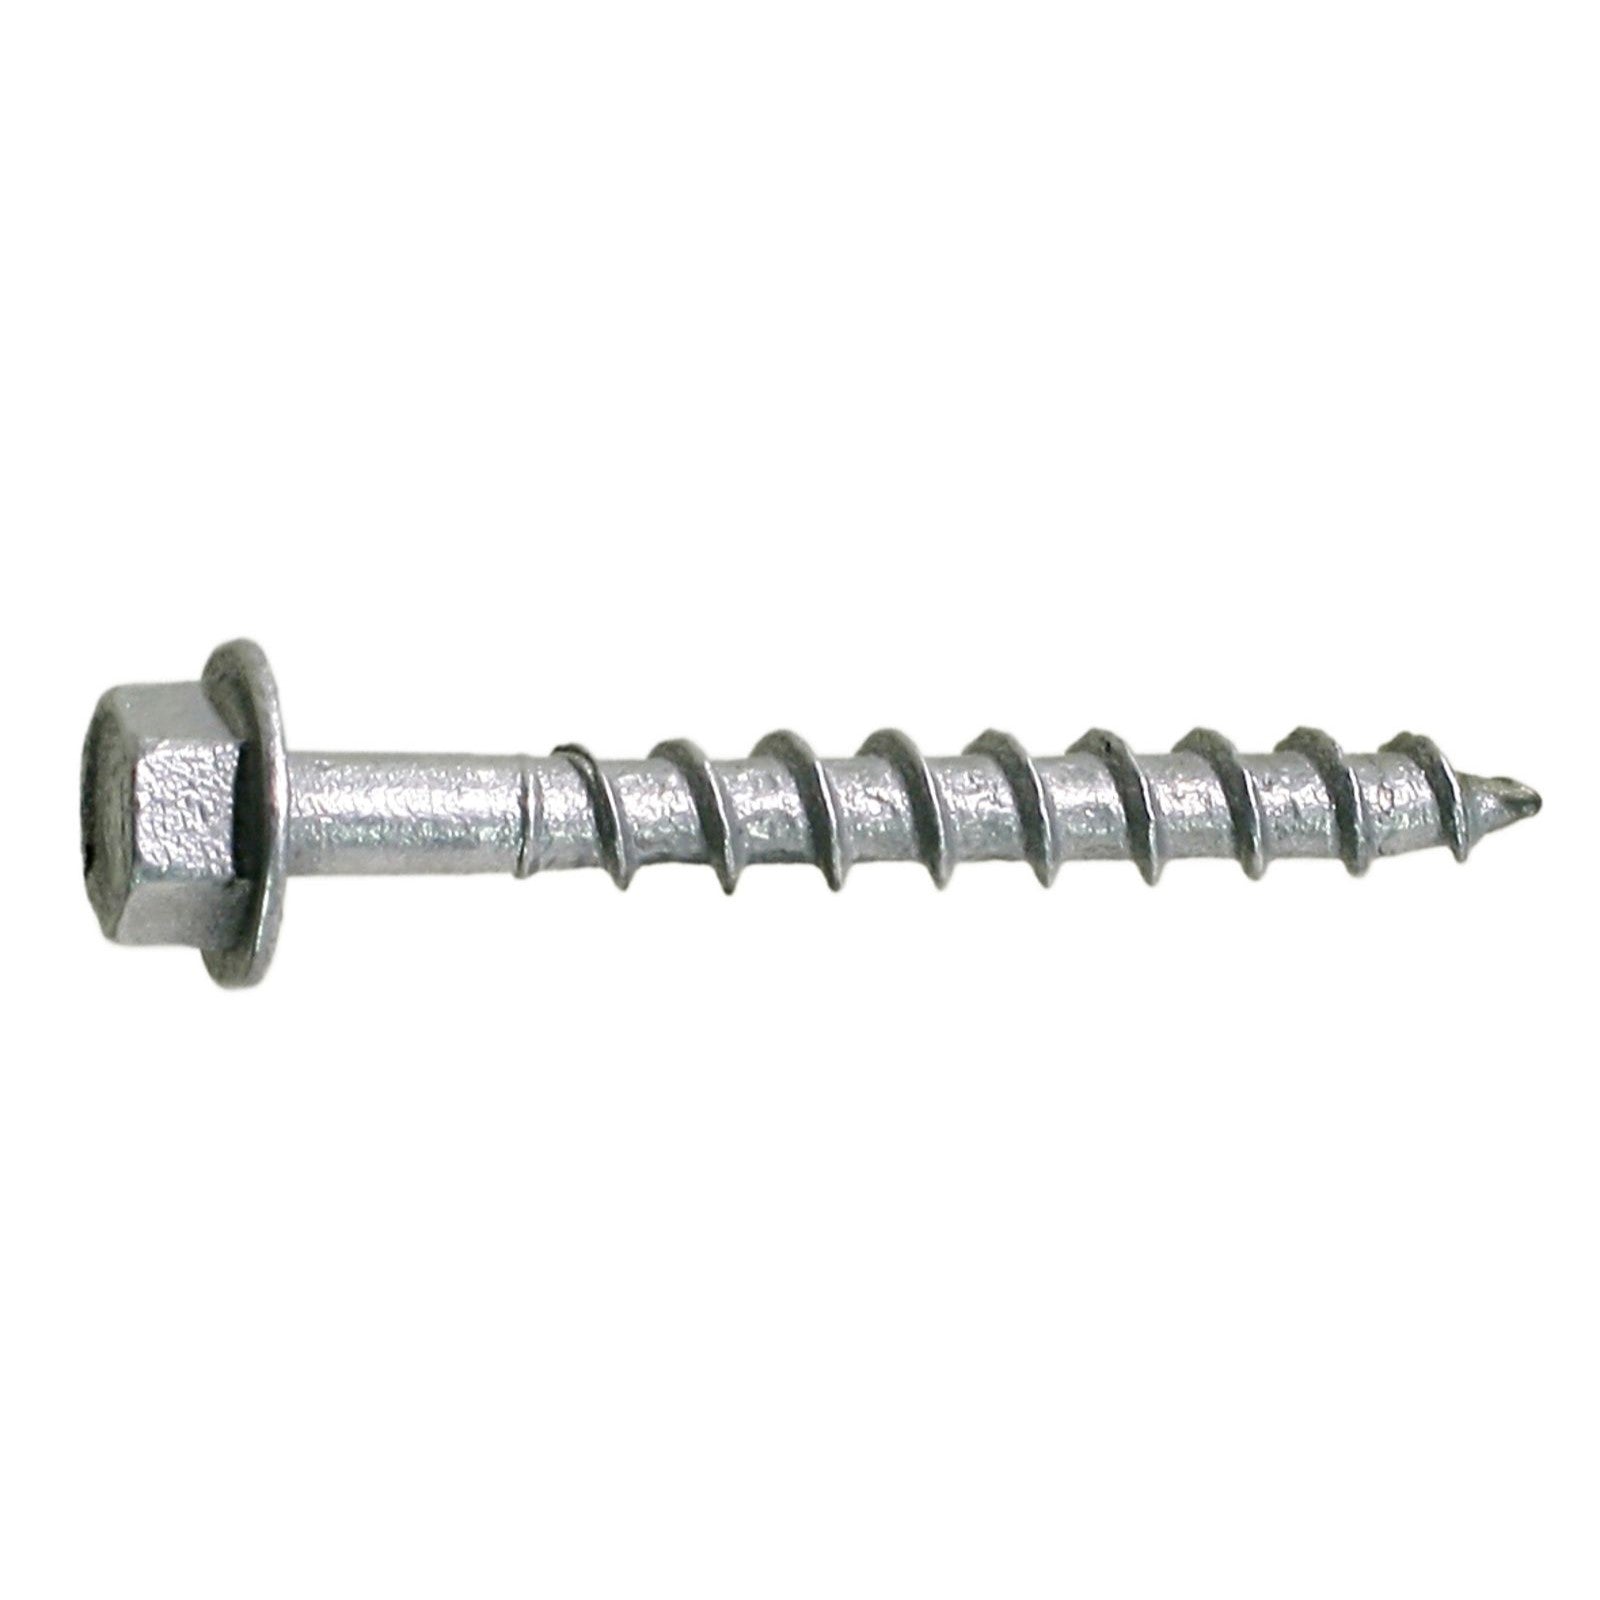 Fasteners for the Classroom